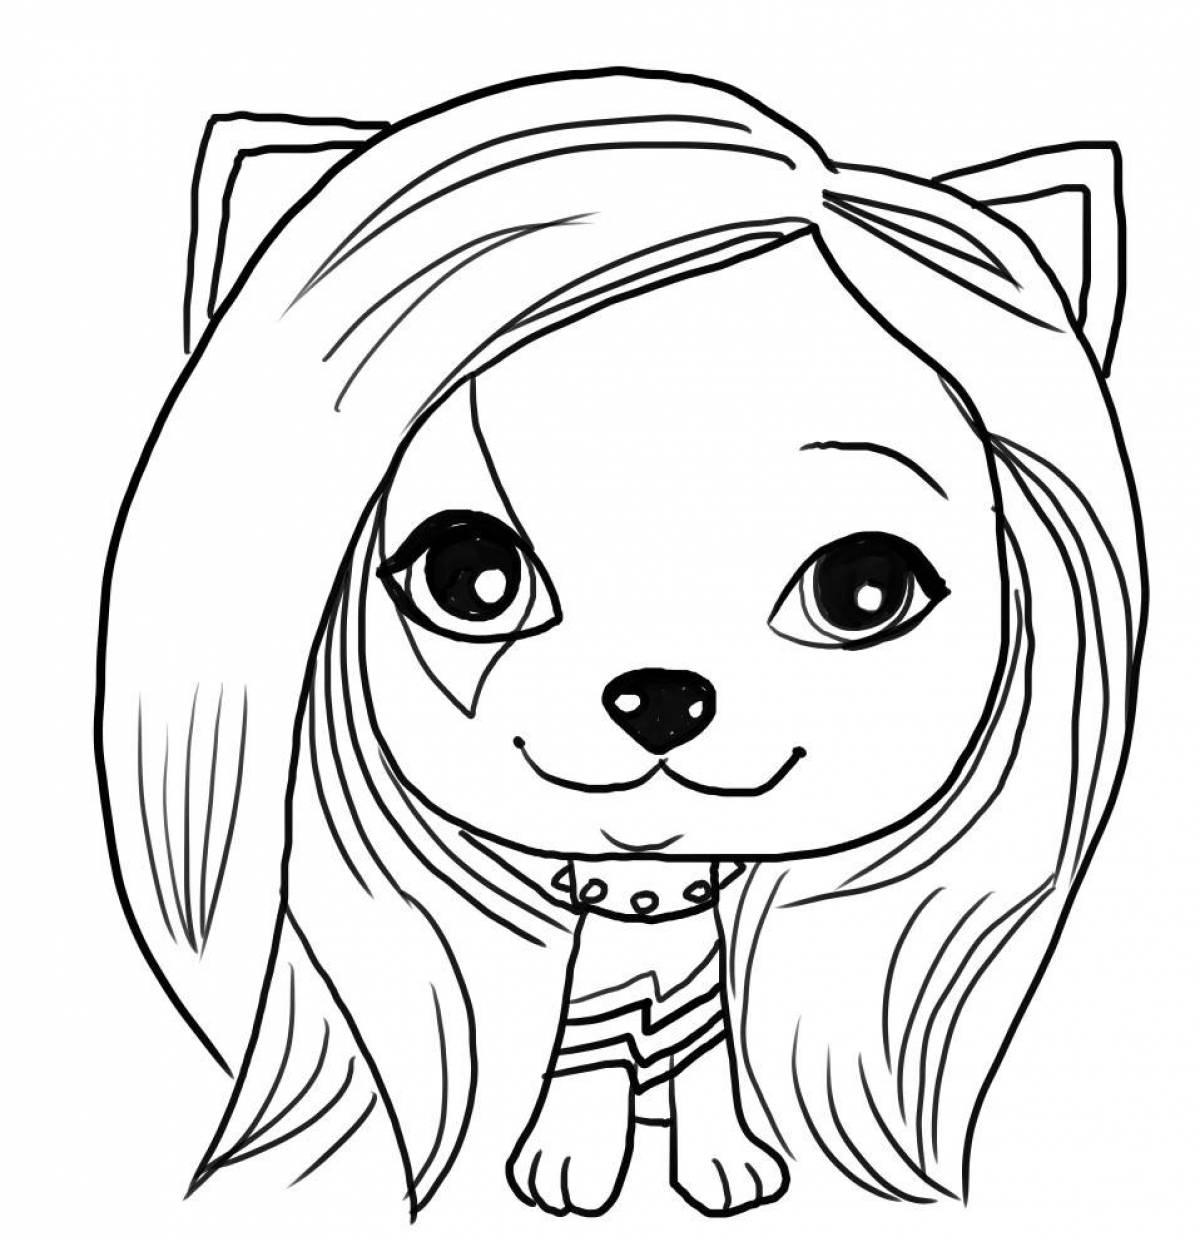 Colorful vip pets coloring page